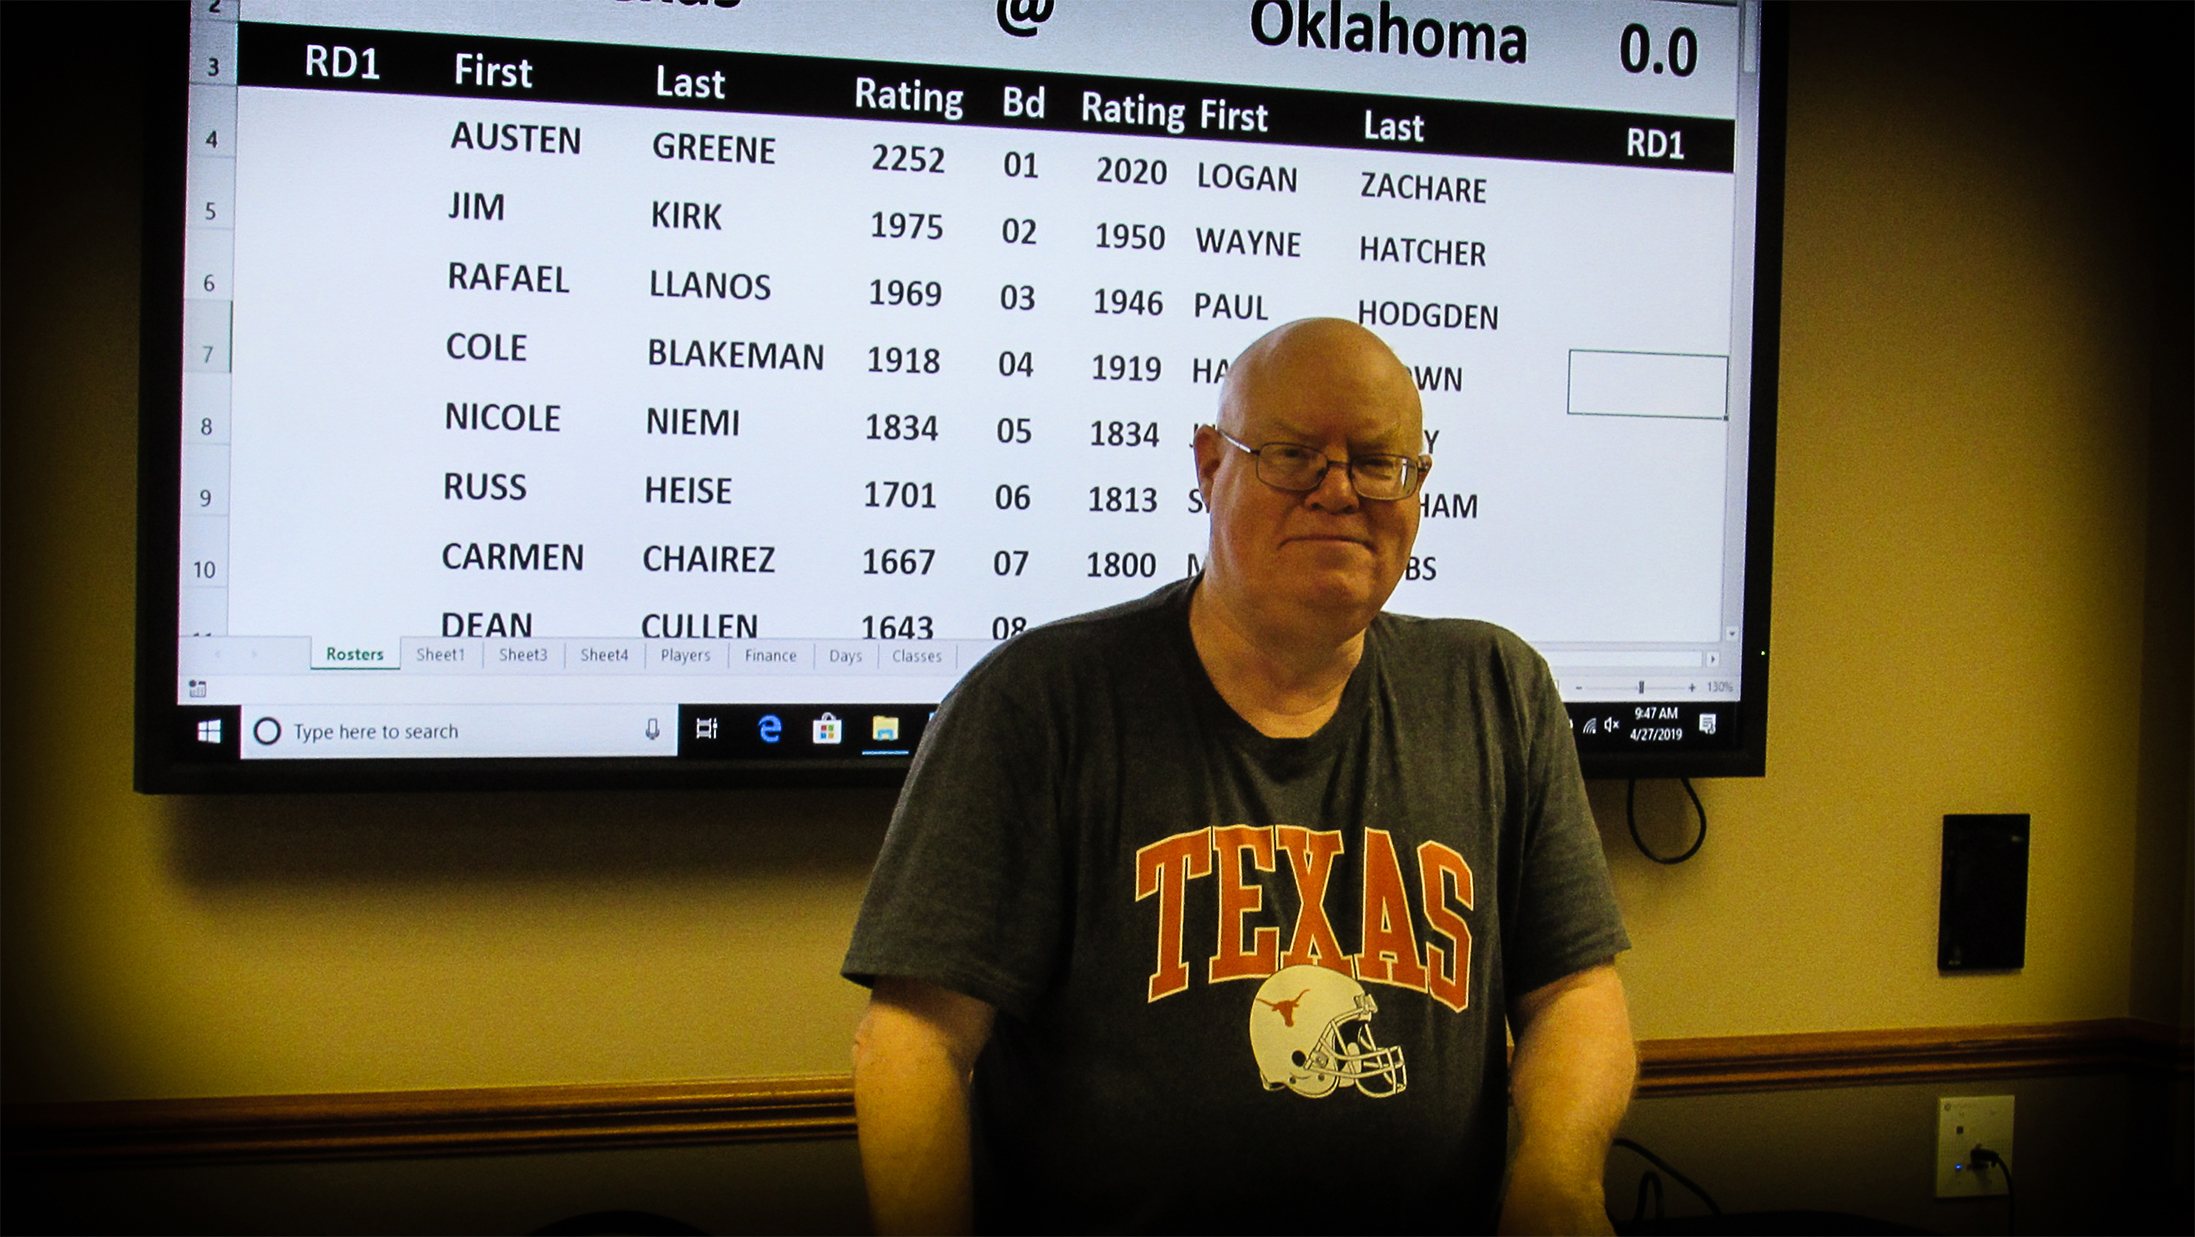 Chief Organizer and TD Jim Hollingsworth began working on RRSO XVII well before last year's RRSO.  On January 30, 2018, the playing date was confirmed with Hotel Manager Connie Dunn and posted on the OCF and RRSO websites.  On February 4, 2018, he asked Lori Balkum, the TCA Tournament Clearing House Administrator, to post on the TCA Tournament Calendar.  He coordinated rule changes and obtained approval from the heads of both sponsoring organizations by May 8, 2018.  Finally, on January 15, 2019, Recruiting Season and the real work began!  This was his 12th RRSO.  Photo by Mike Tubbs.